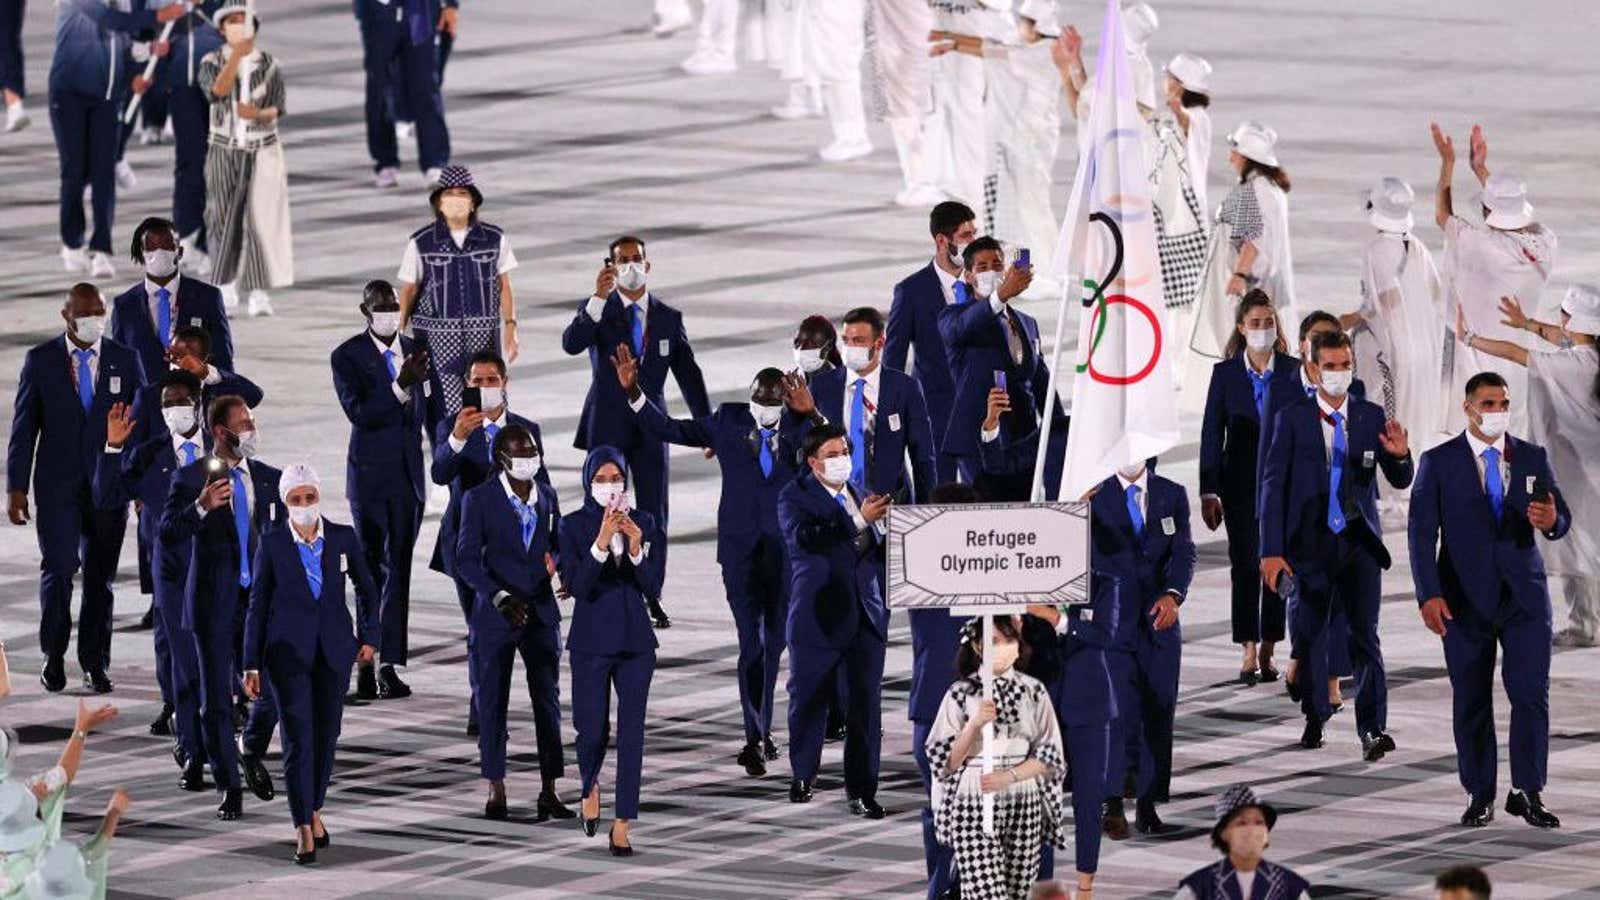 Flag bearers Yusra Mardini and Tachlowini Gabriyesos of The Refugee Olympic Team during the Opening Ceremony of the Tokyo 2020 Olympic Games at Olympic Stadiumâ€¦